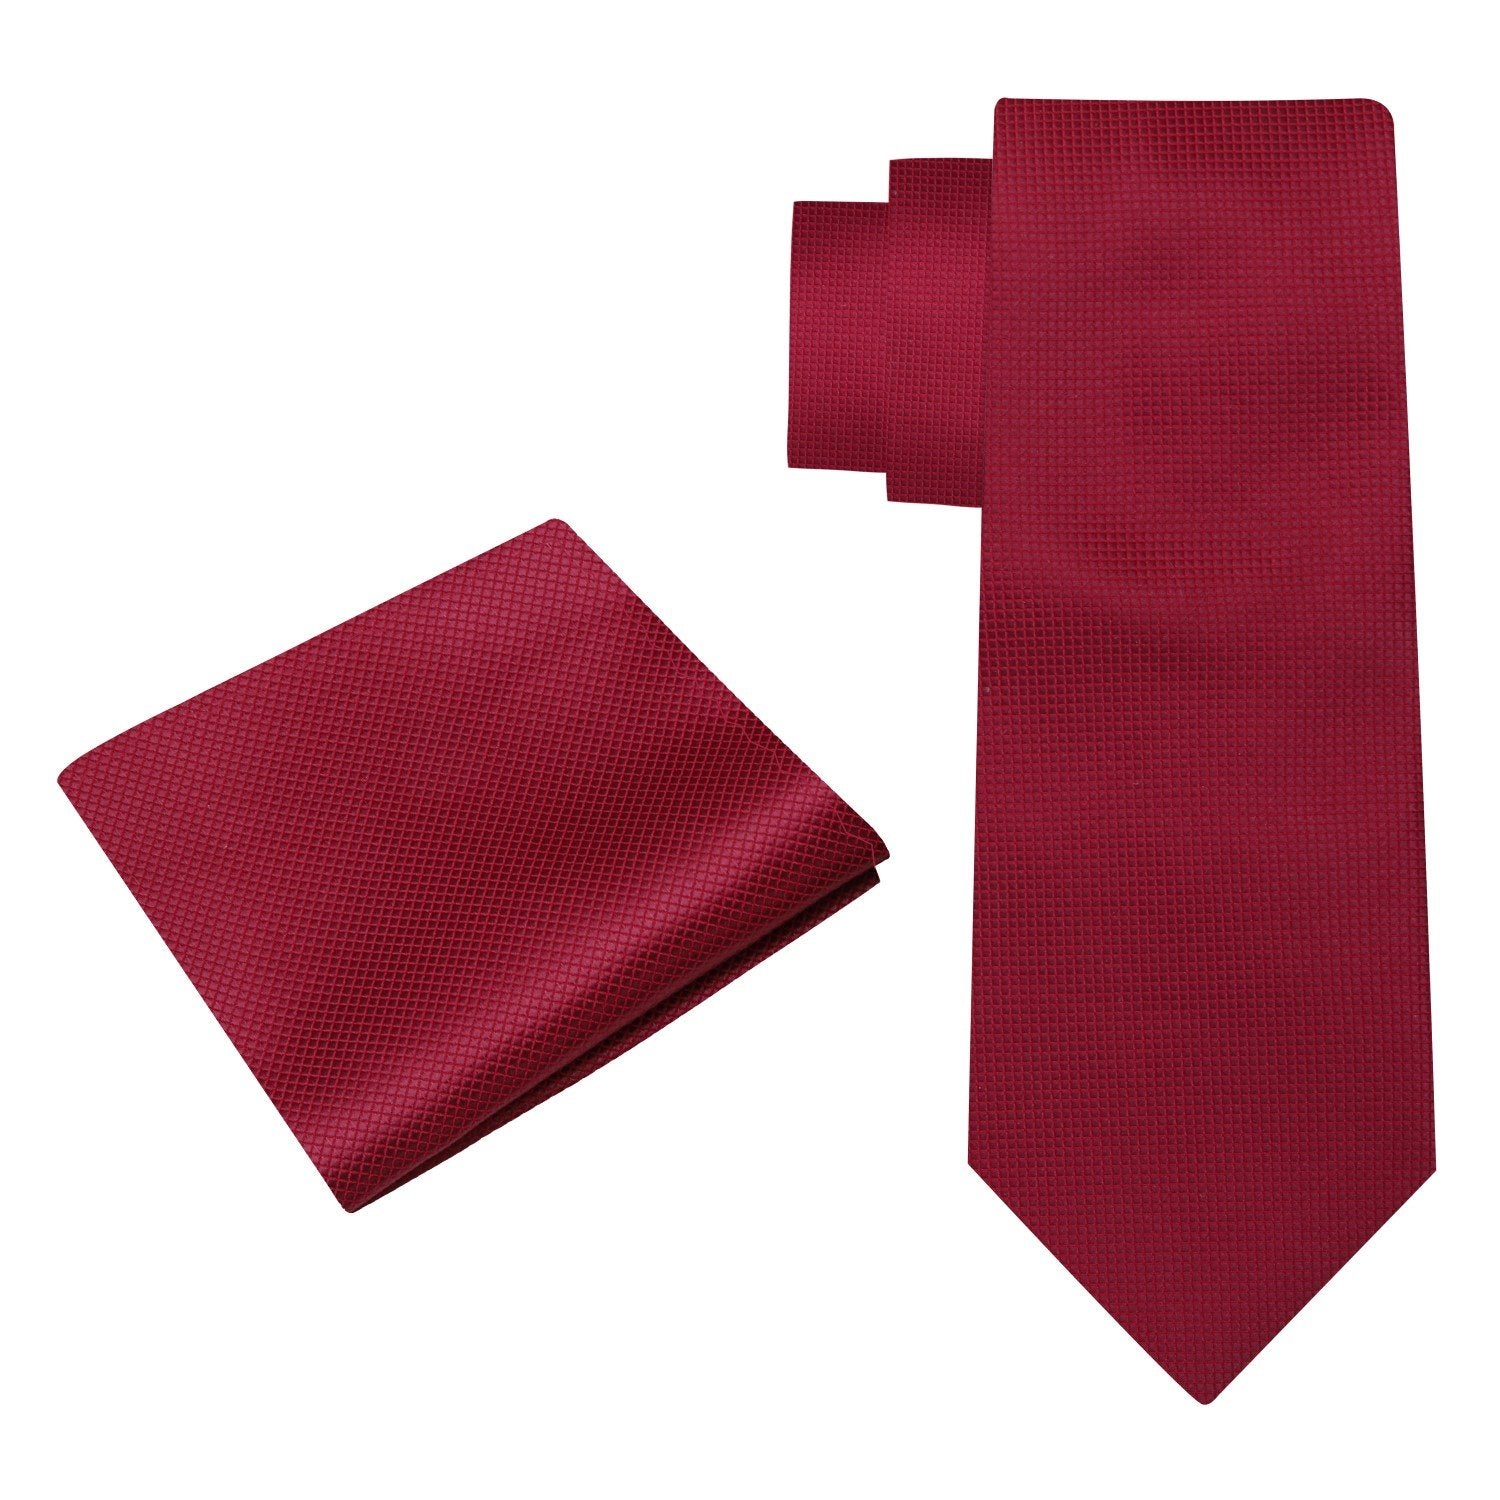 Alt View: A Solid Deep Red With Check Texture Pattern Silk Necktie, Matching Pocket Square